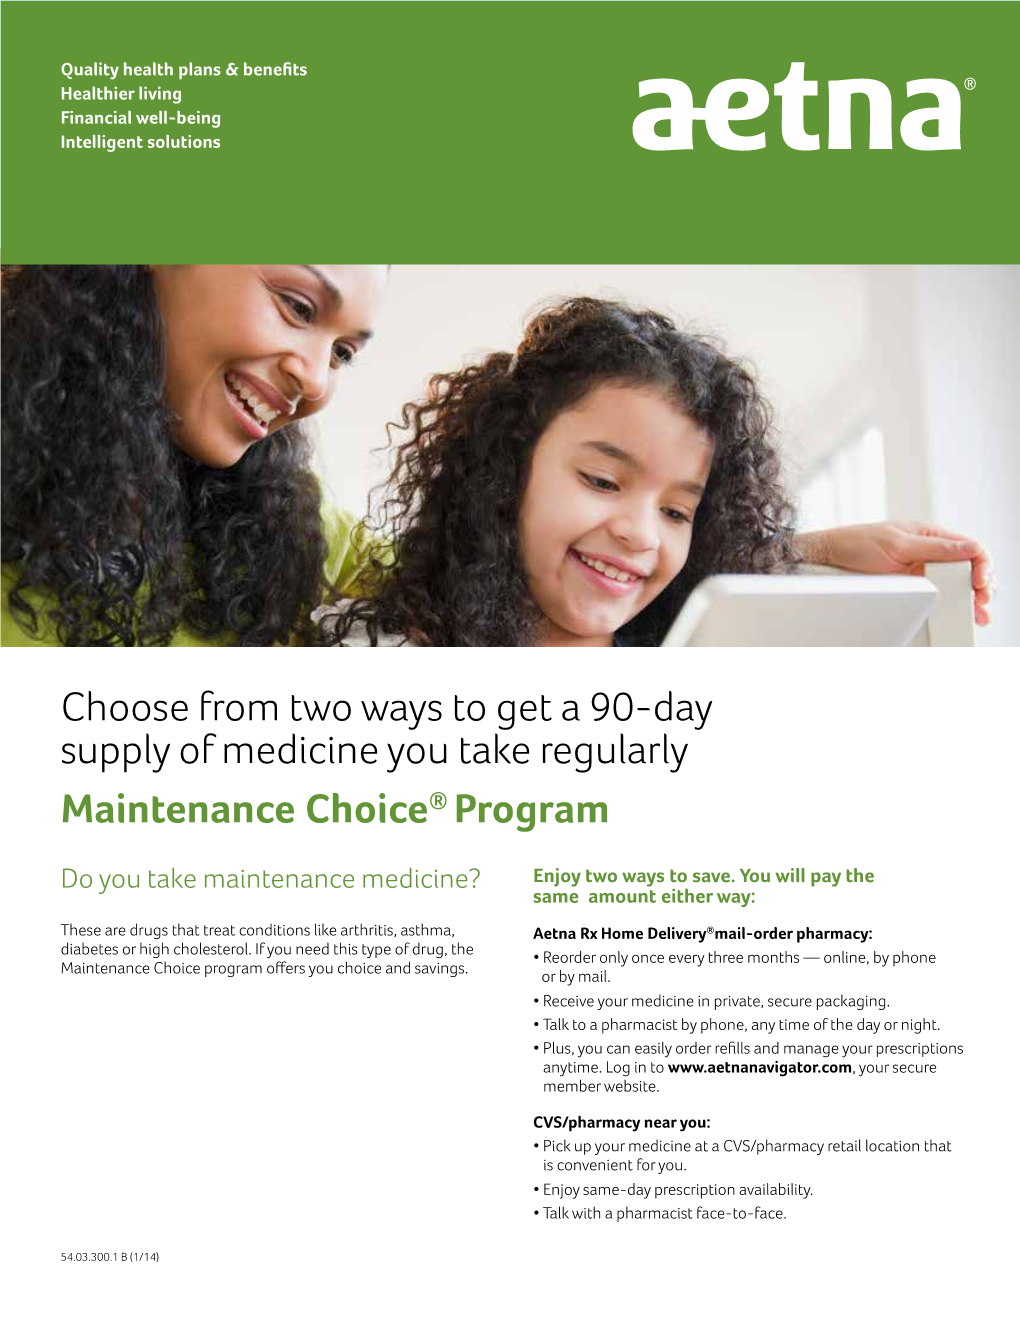 Choose from Two Ways to Get a 90-Day Supply of Medicine You Take Regularly Maintenance Choice® Program